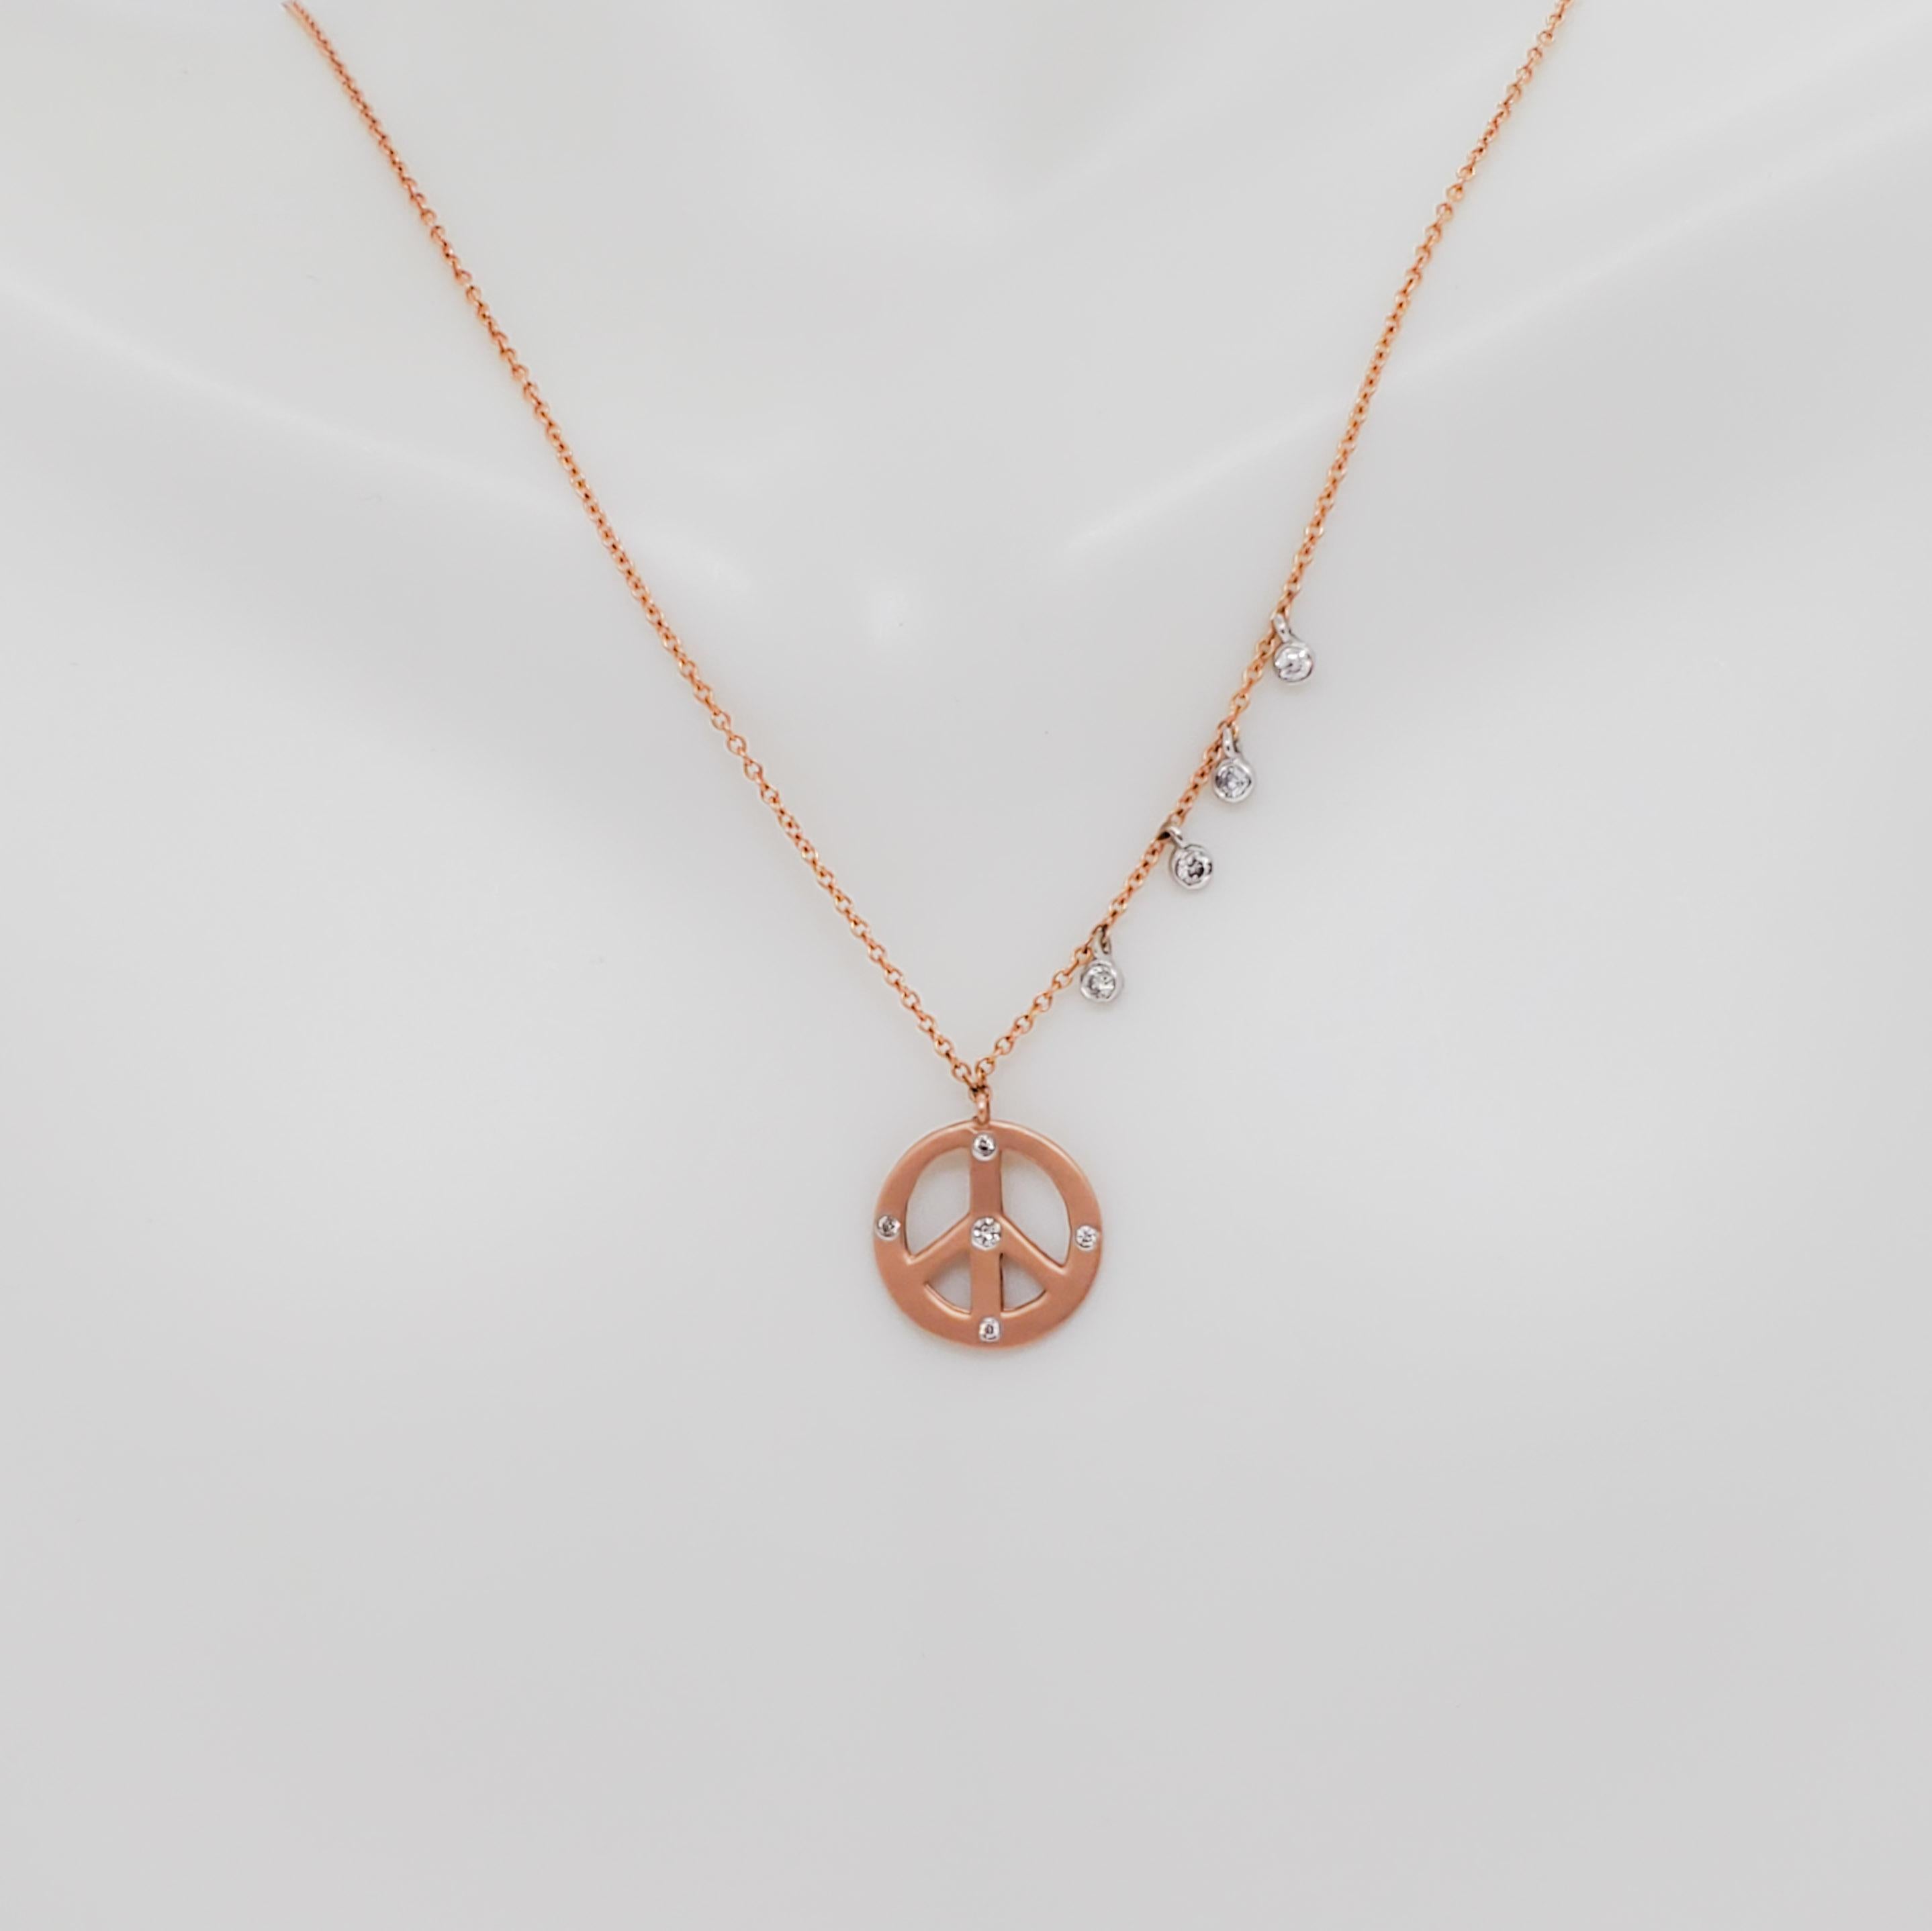 Women's or Men's Estate Peace Sign Diamond Pendant Necklace in 14k Rose and White Gold